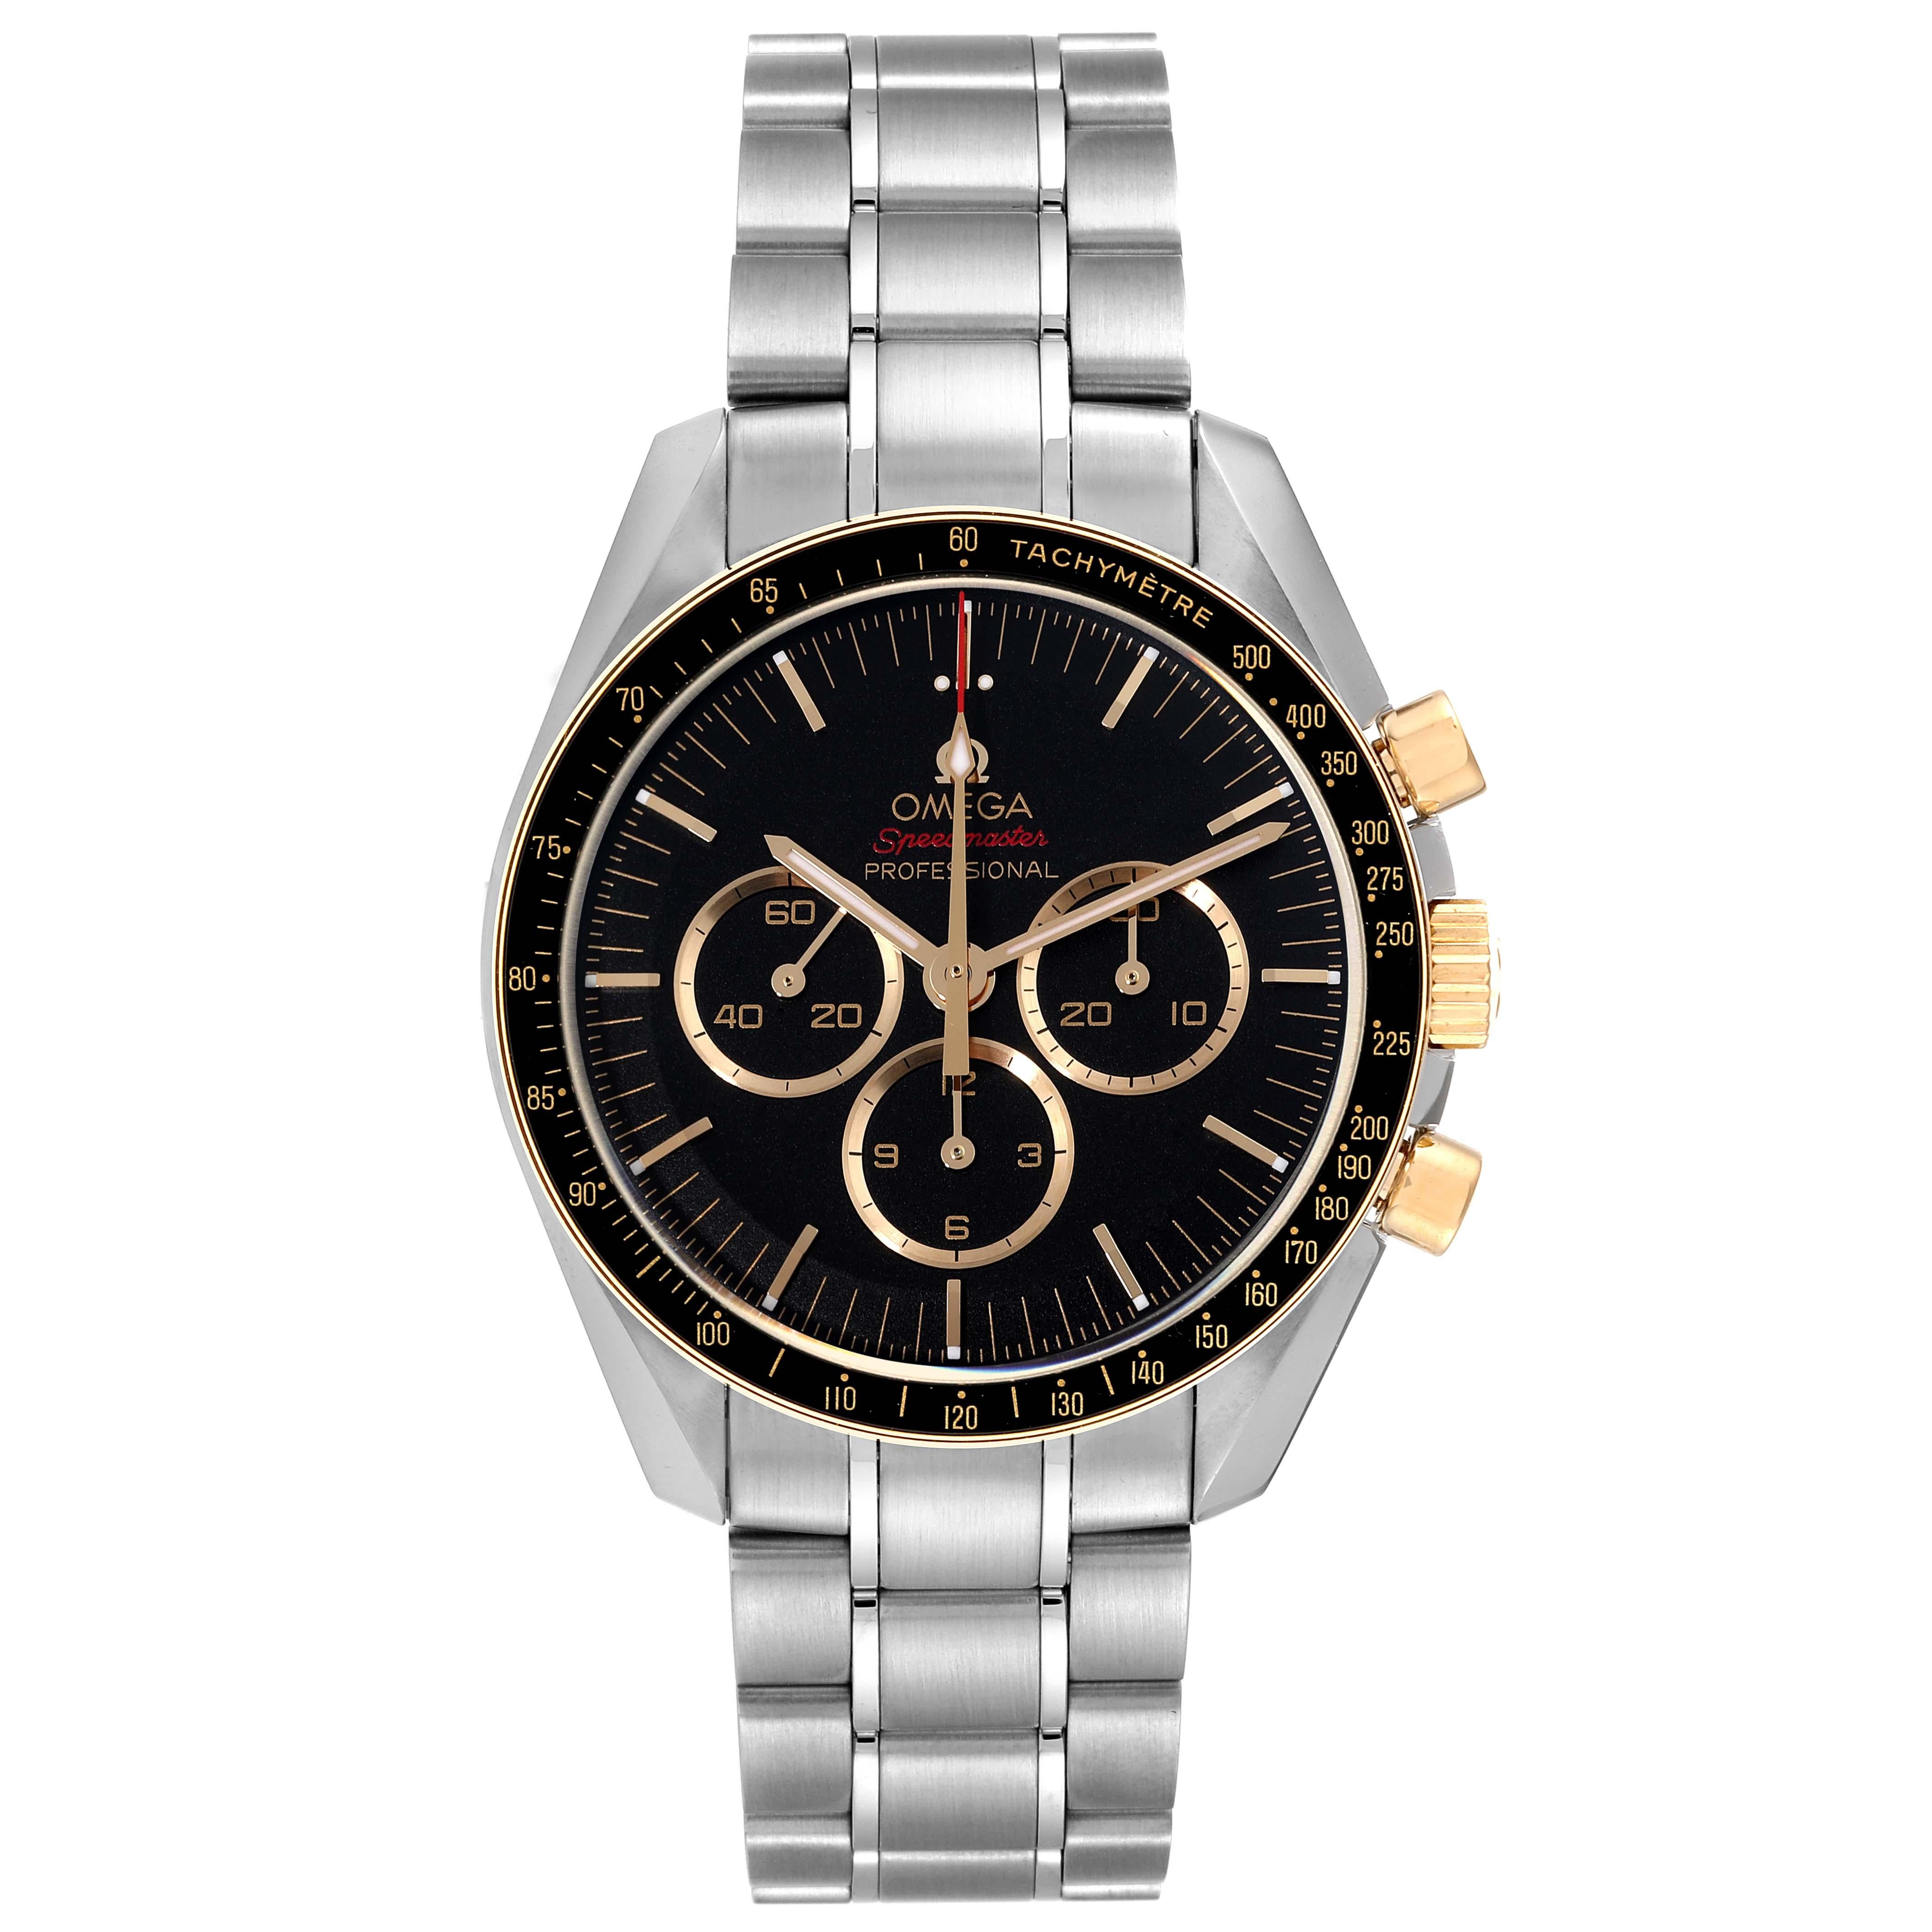 Omega Speedmaster Tokyo 2020 Limited Edition Steel Yellow Gold Mens Watch 522.20.42.30.01.001 Unworn. Manual winding chronograph movement. Stainless steel round case 42.0 mm in diameter. 18k yellow gold crown with Omega lgoo. 18k yellow gold bezel